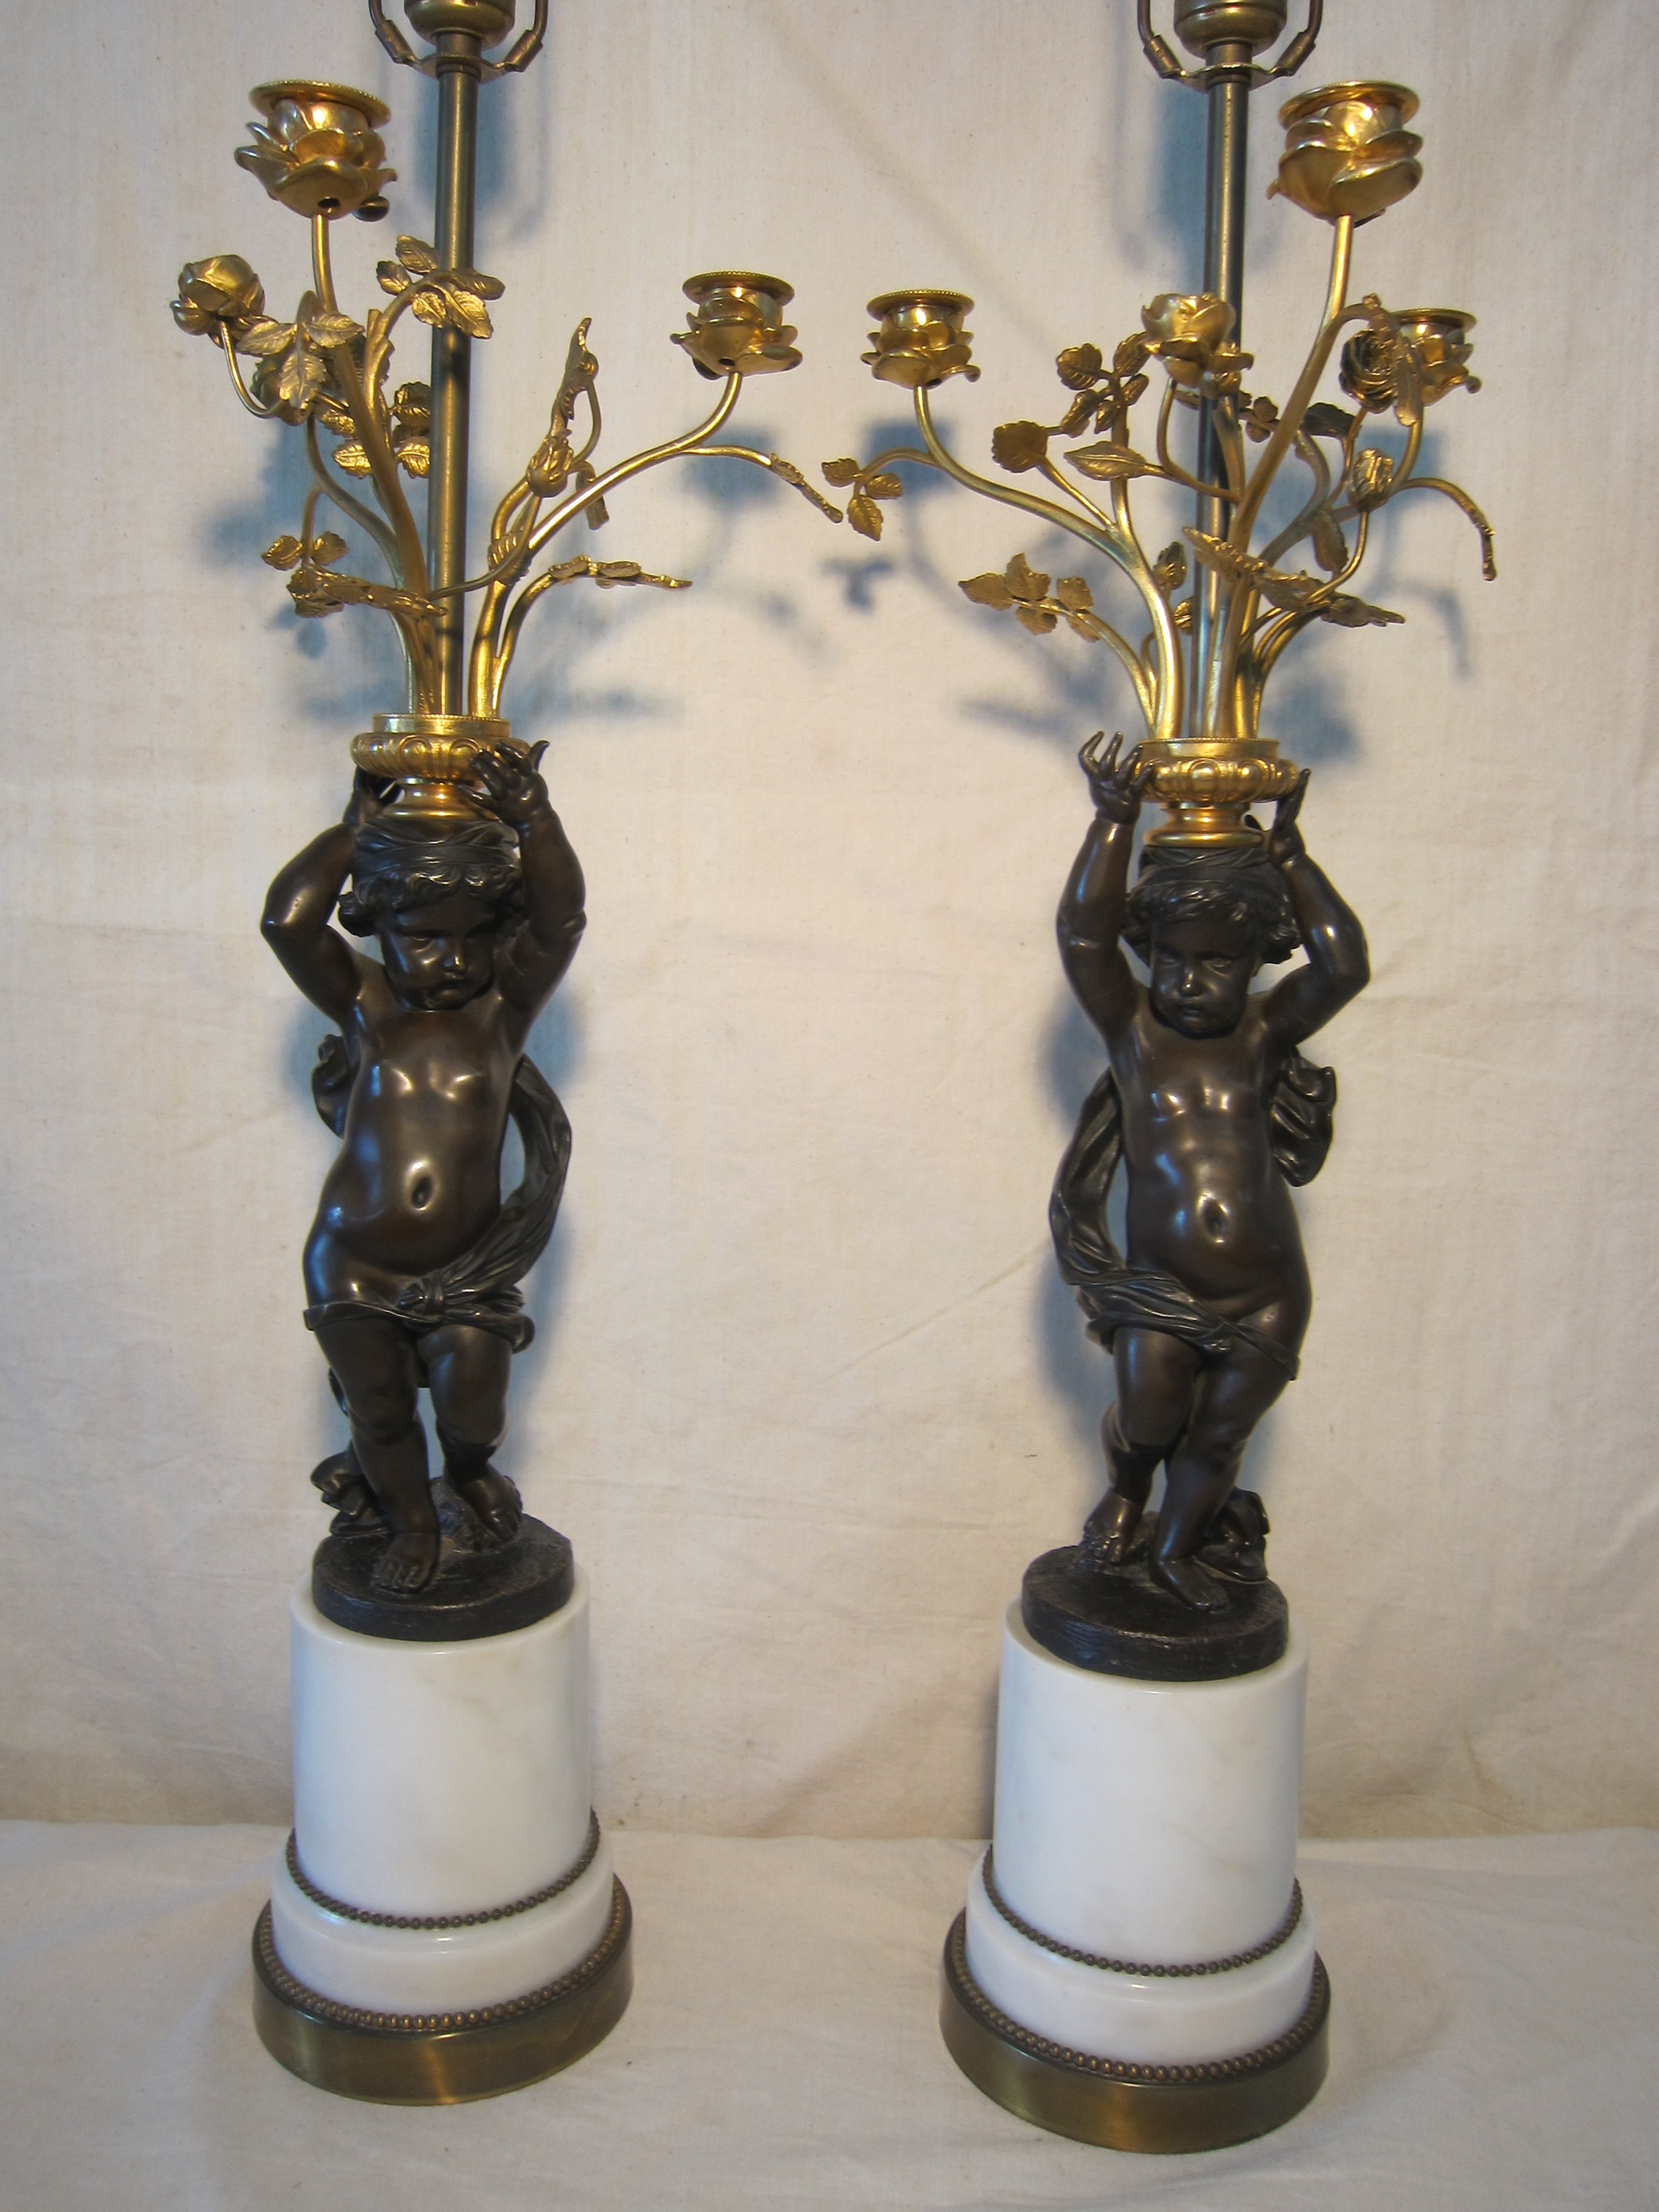 Spectacular Pair of 19th century French Gilt Bronze Putti candelabra lamps.
Original marble socle bases. True pair A left side and A right sided image. Each Bronze has it differences. Variations can be seen also in the fingers, the hands, hair, 